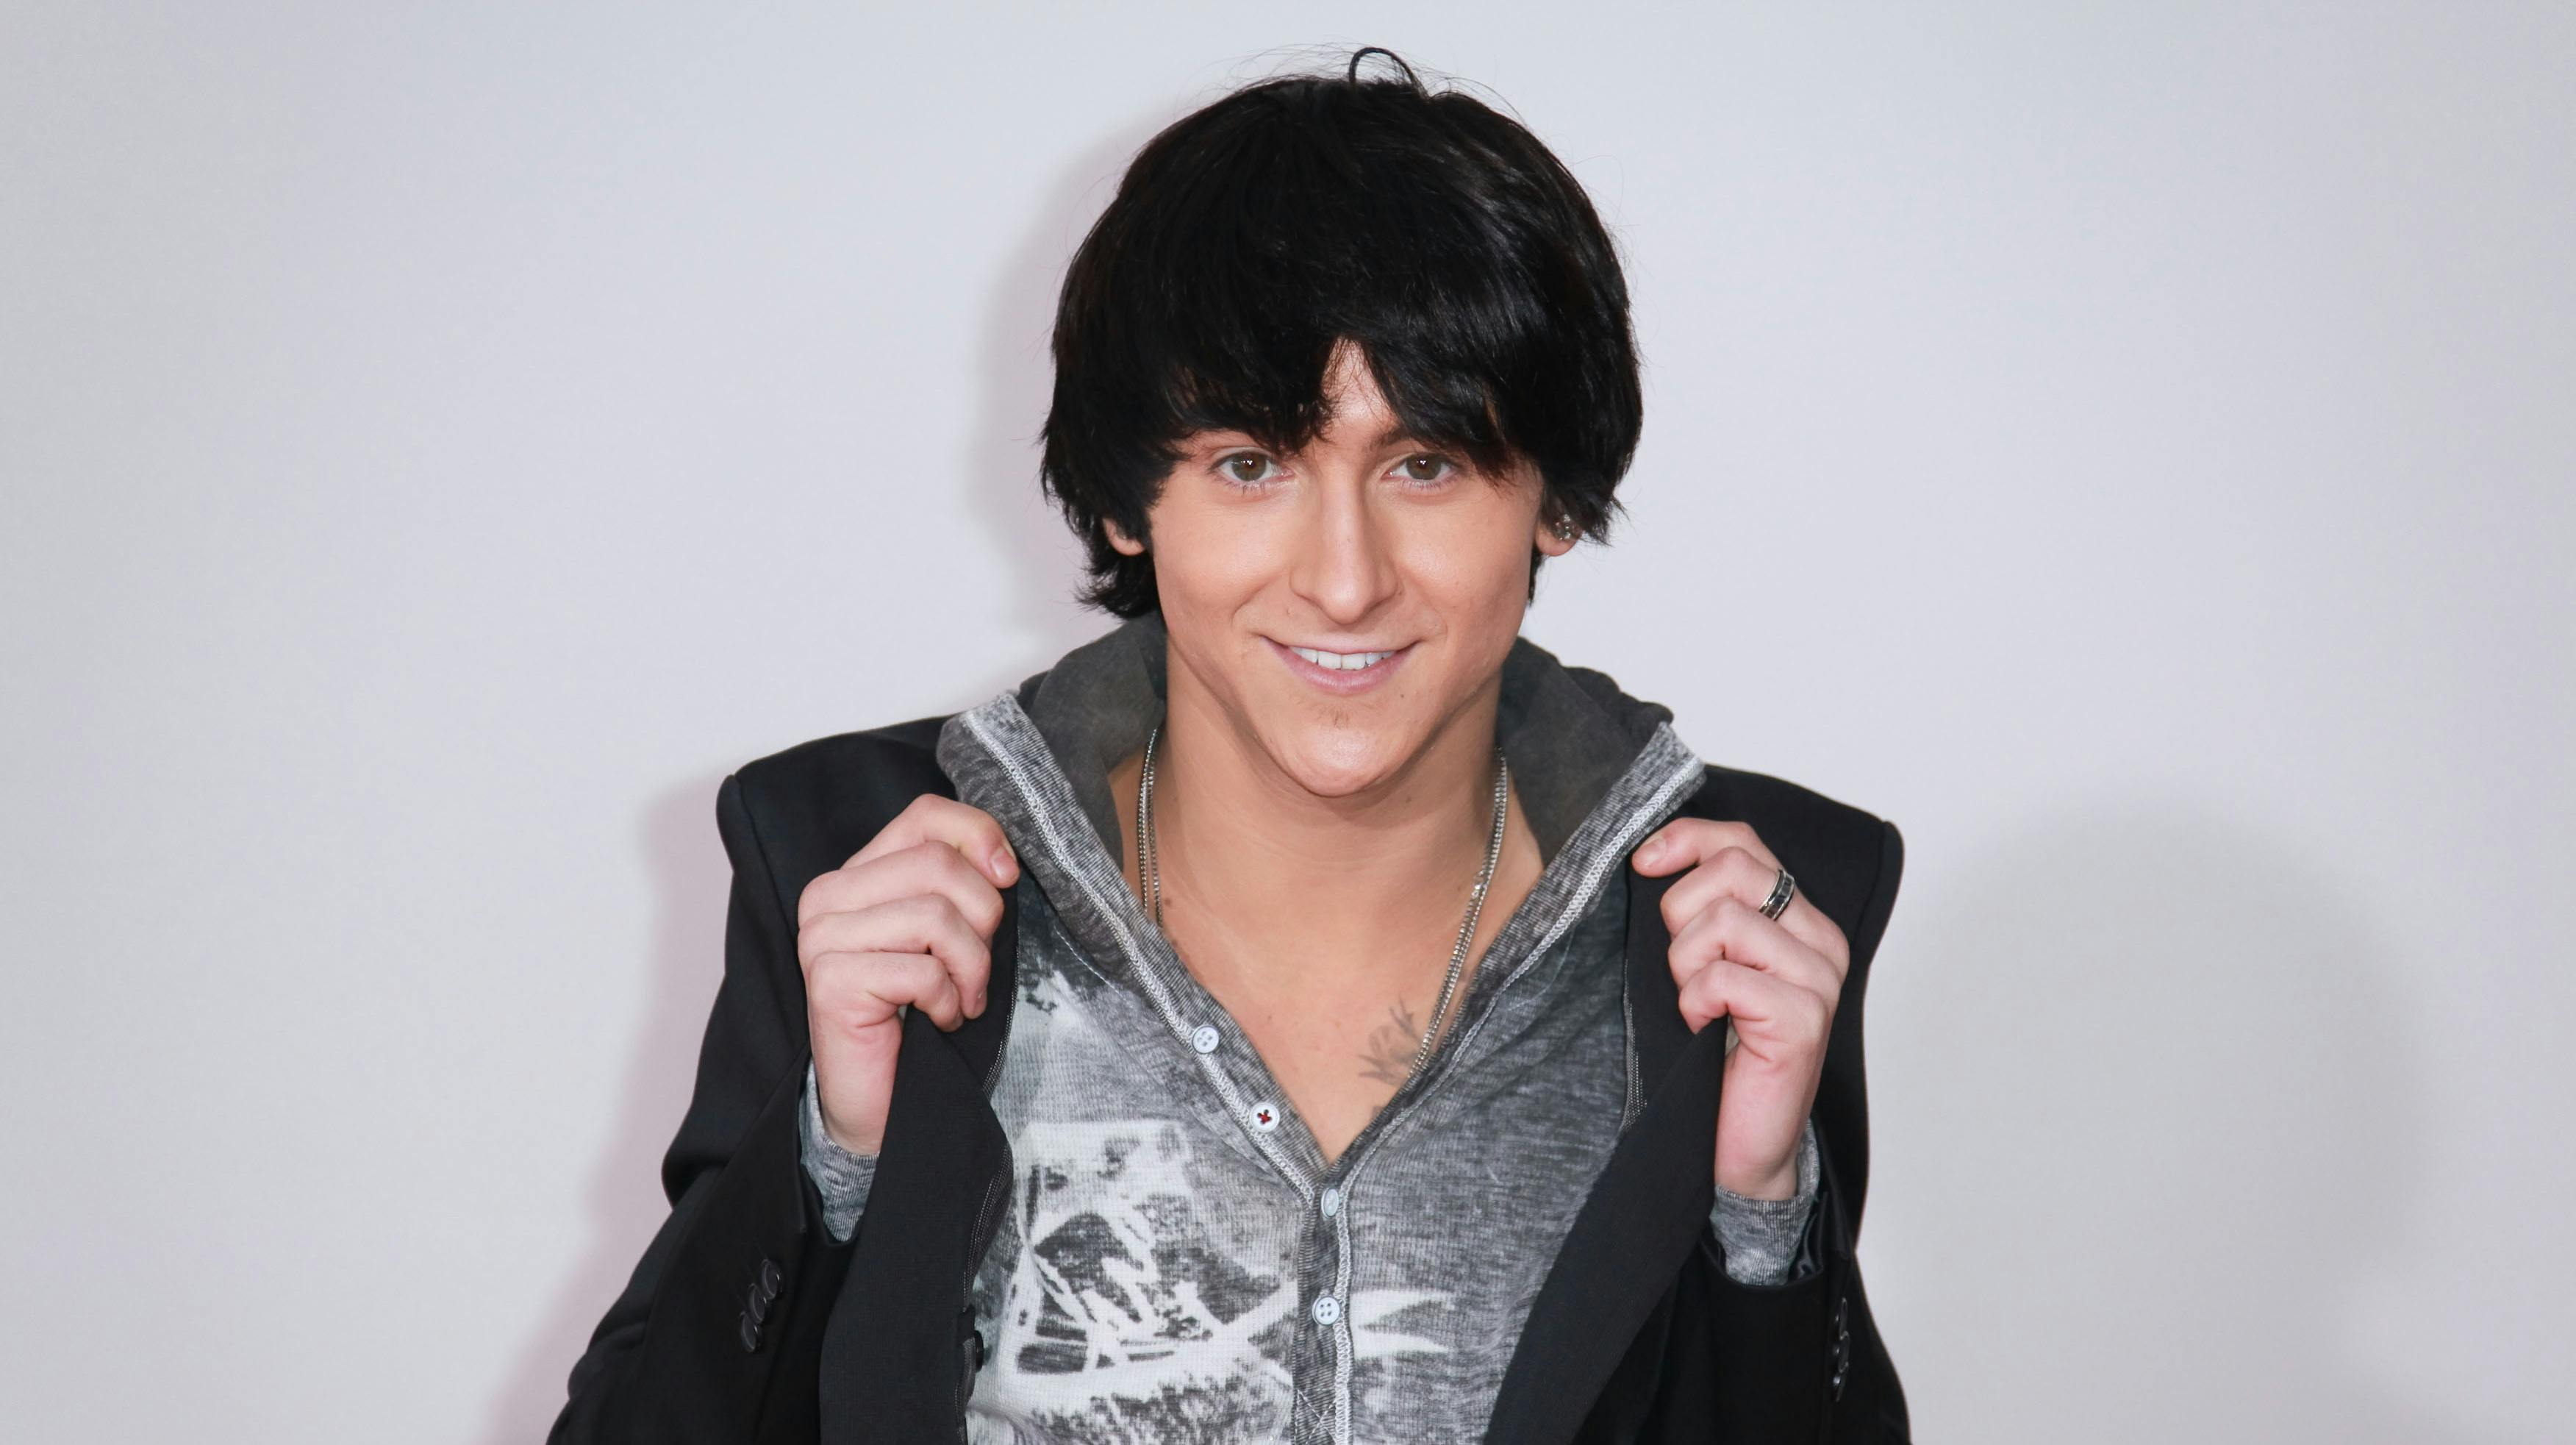 Mitchel Musso at the arrivals of THE 2010 AMERICAN MUSIC AWARDS held at the Nokia Theatre LA LIVE in Los Angeles, CA. The event took place on Sunday, November 21, 2010.